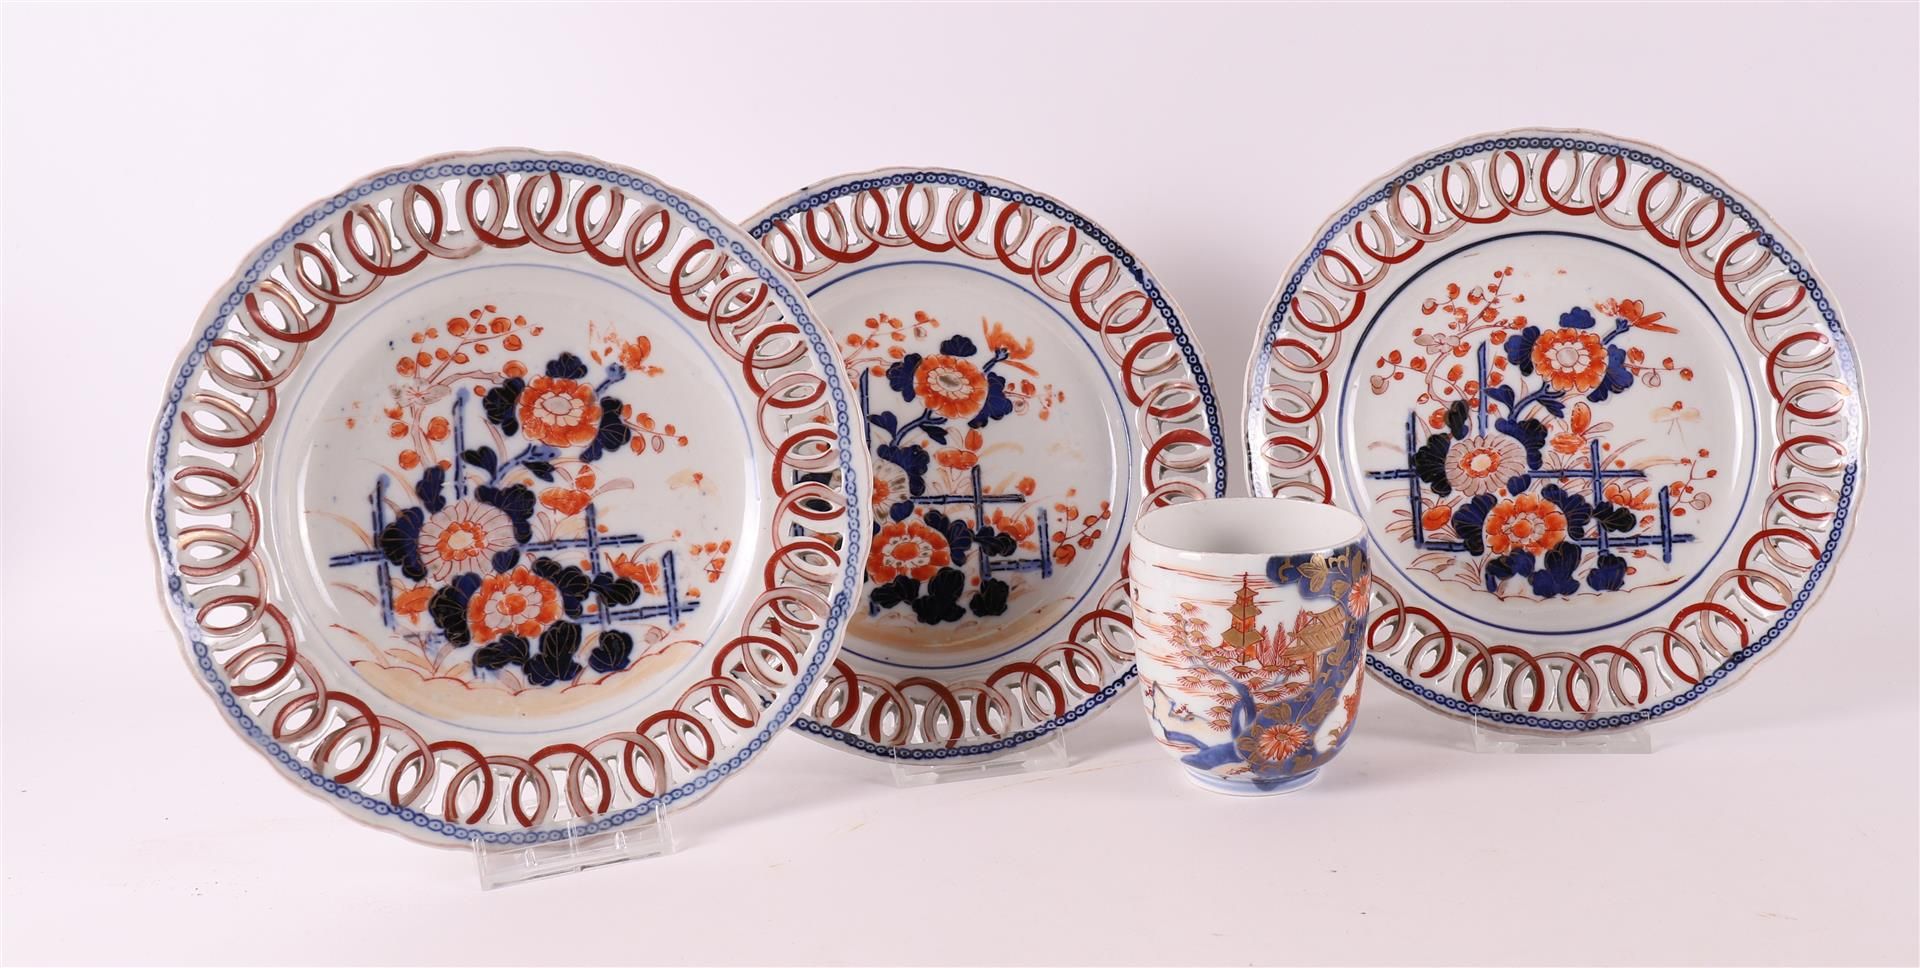 A series of three porcelain Imari plates with pierced lip, Japan, Meiji, late 19th century. Hereby a